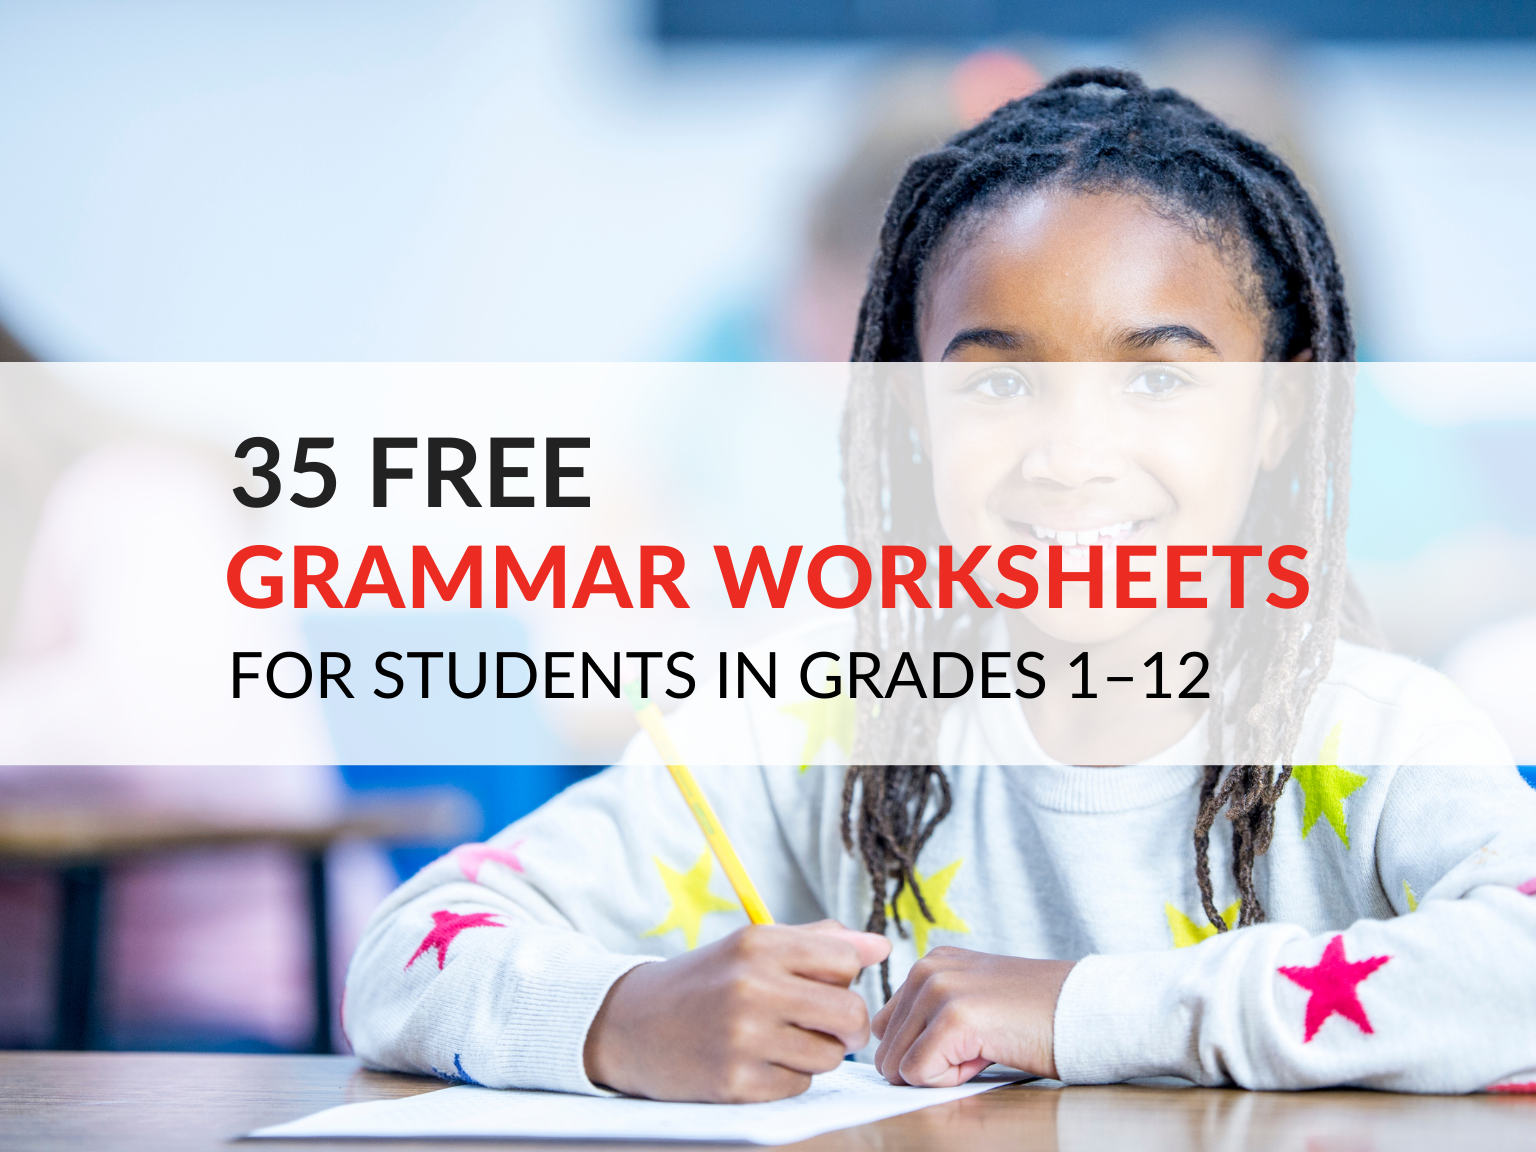 Engaging Activity Sheets That Target and Reinforce the Key Grammar Skills Students Need to Be Successful Writers Instant Grammar Practice Kids Will Love! 40 